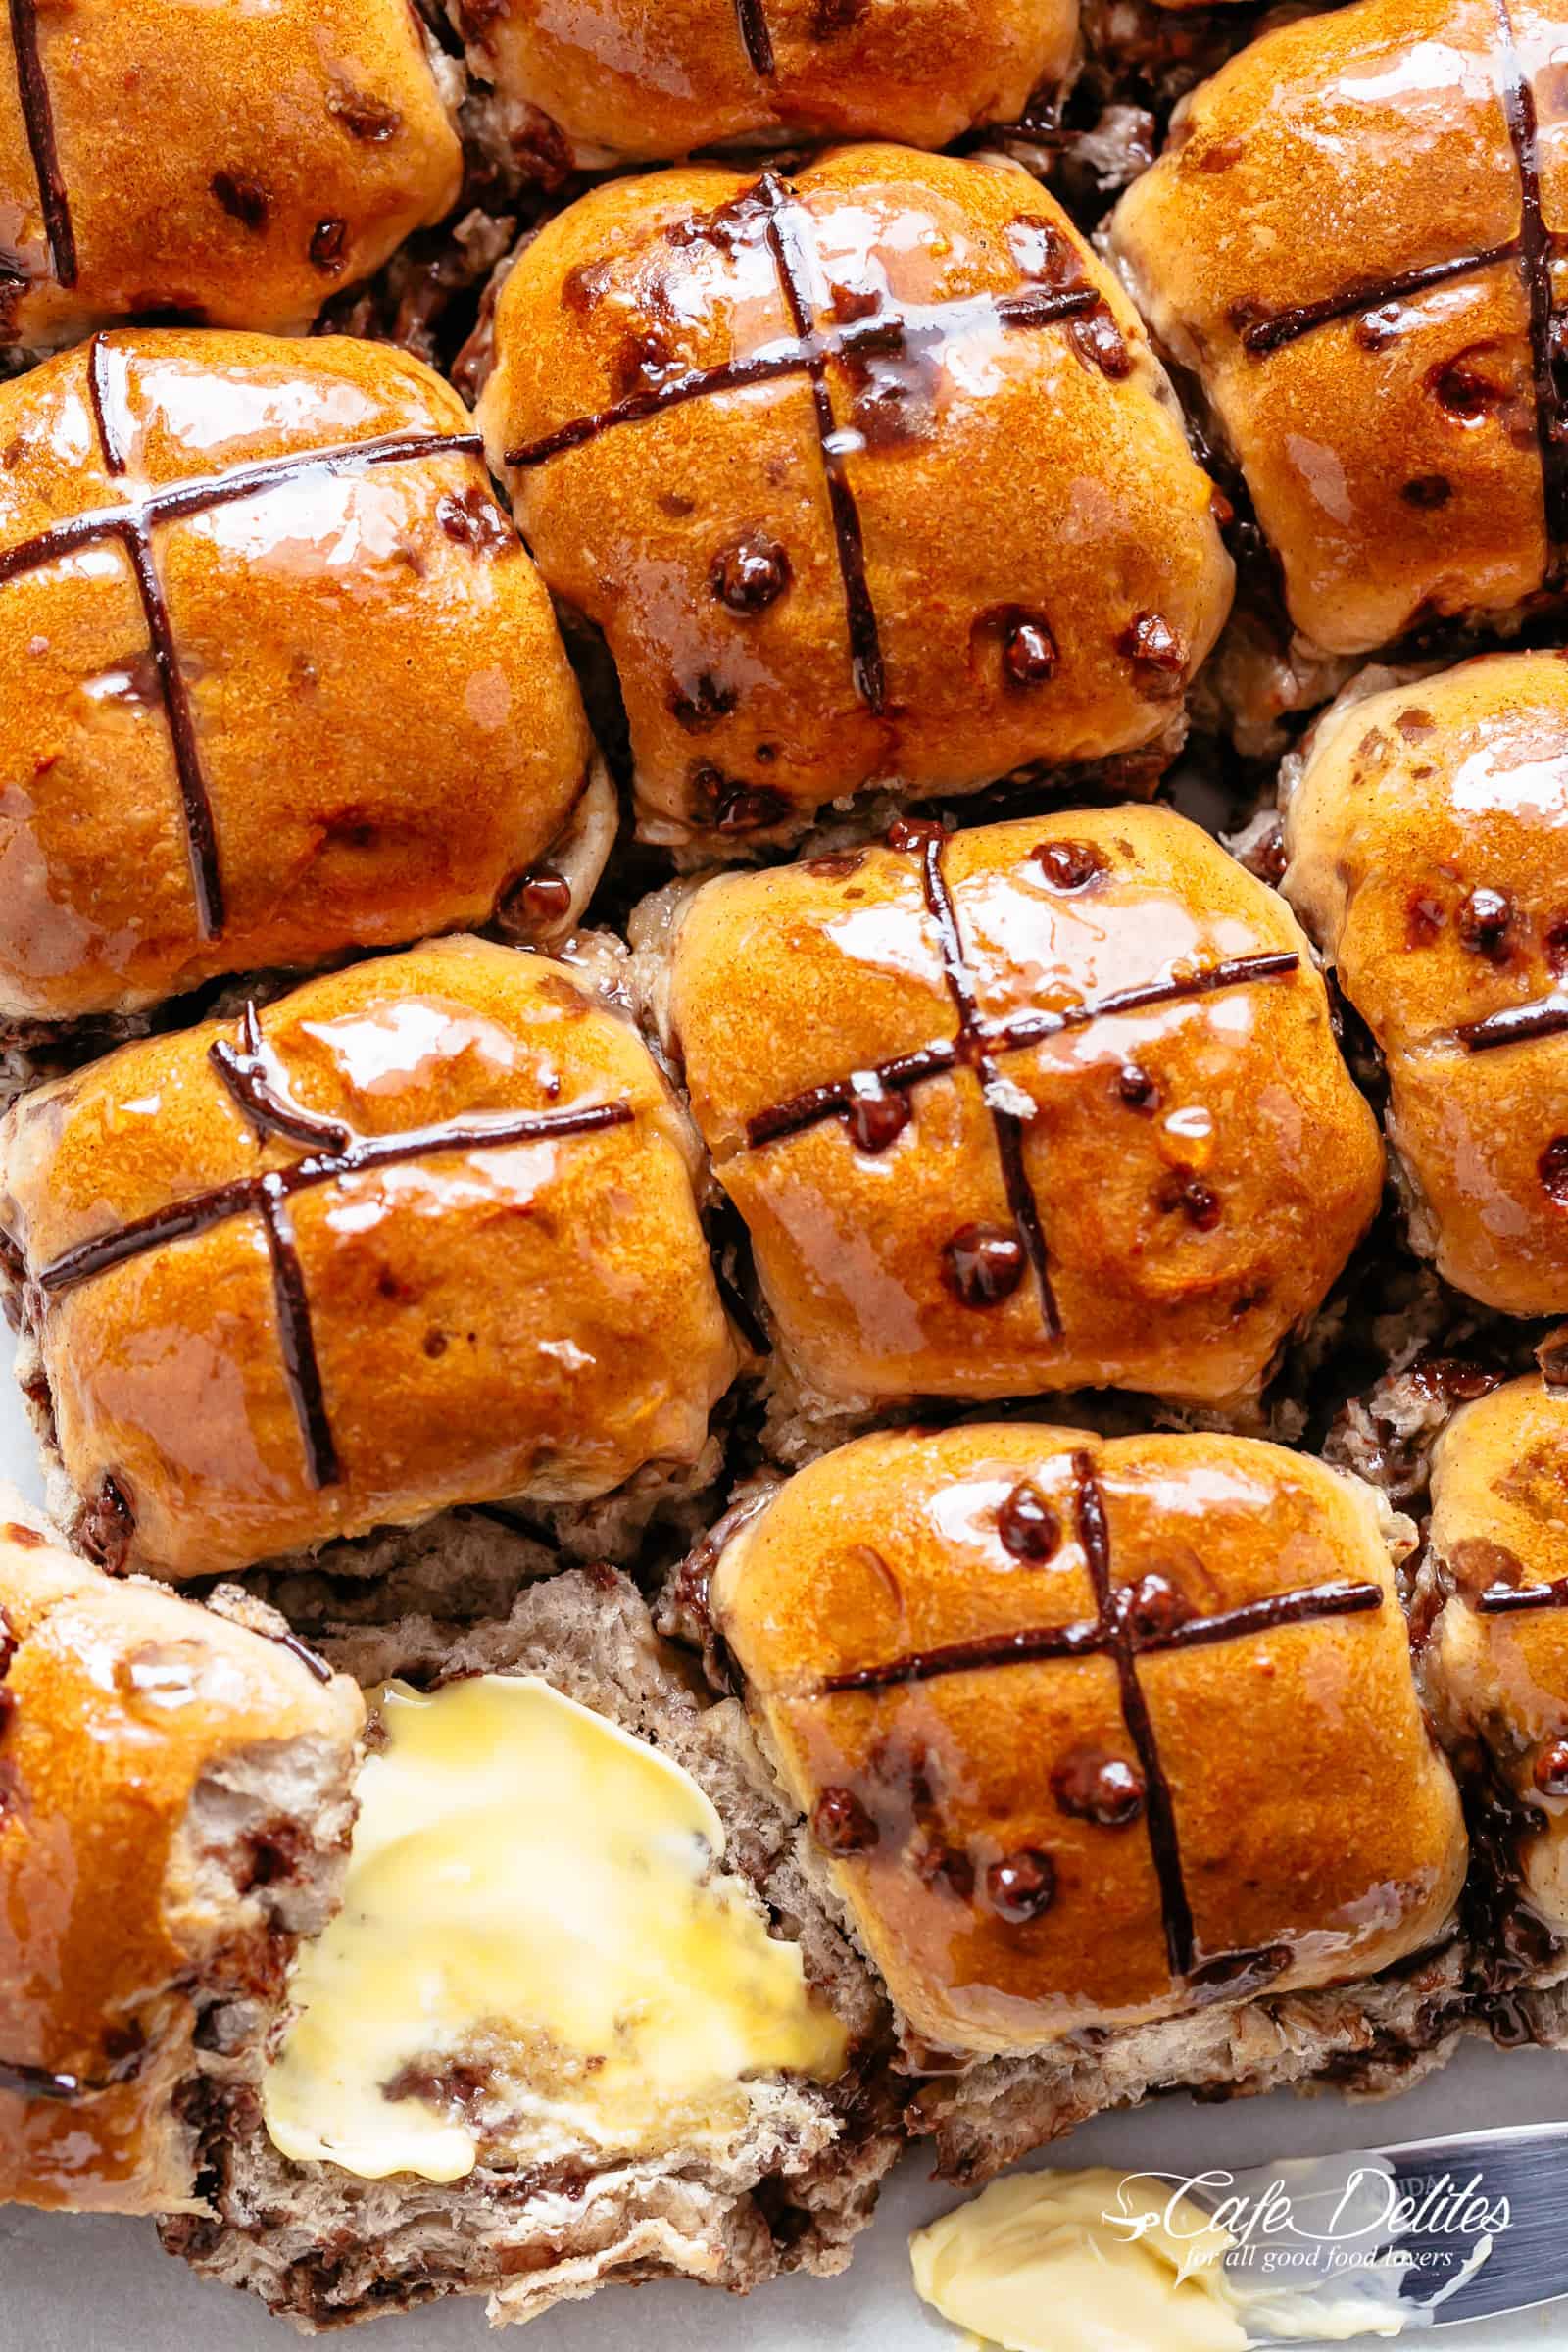 Fluffy and fragrant homemade hot cross buns filled with melted chocolate chips to please the kids as well as the adults! Better than store bought, there's just something about warm and fresh homemade breads! The best part? No proofing yeast! This recipe is so easy! | cafedelites.com